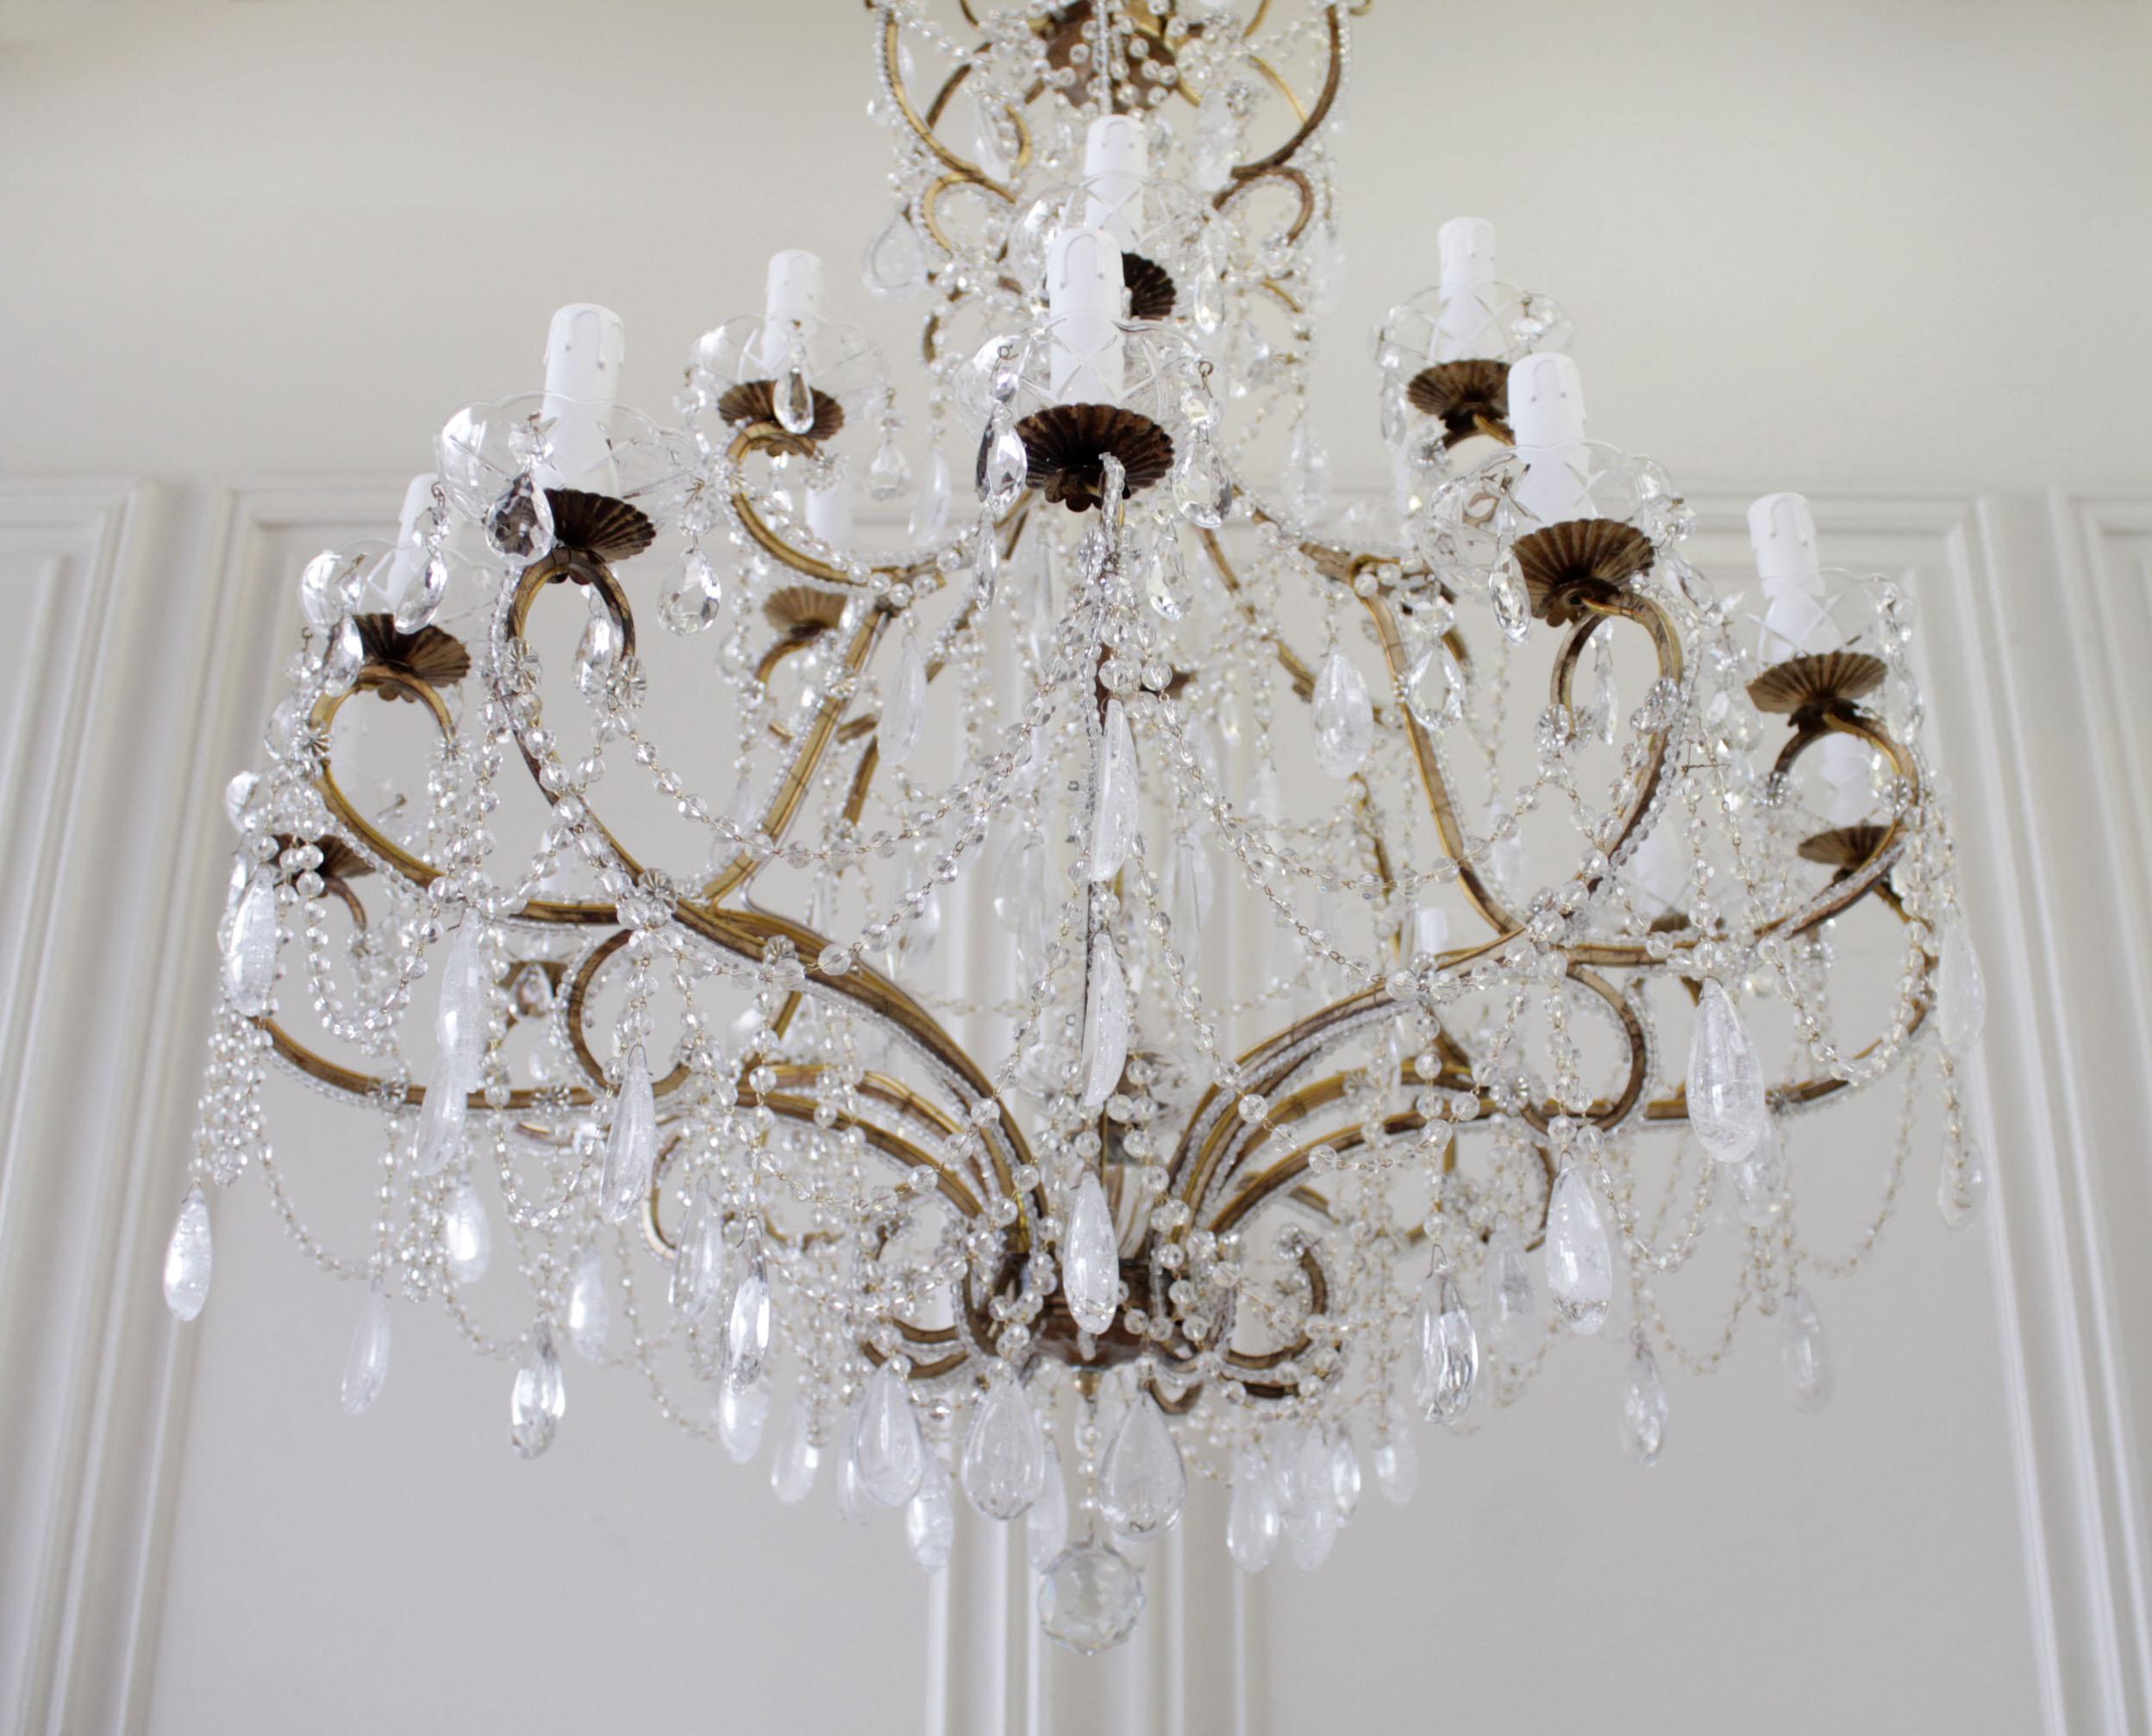 Antique reproduction Italian chandelier with rock style crystals
This beautiful reproduction was designed by Full Bloom Cottage, handmade in Italy. This large tiered chandelier has a macaroni beaded frame, with English style beaded chain, and rock